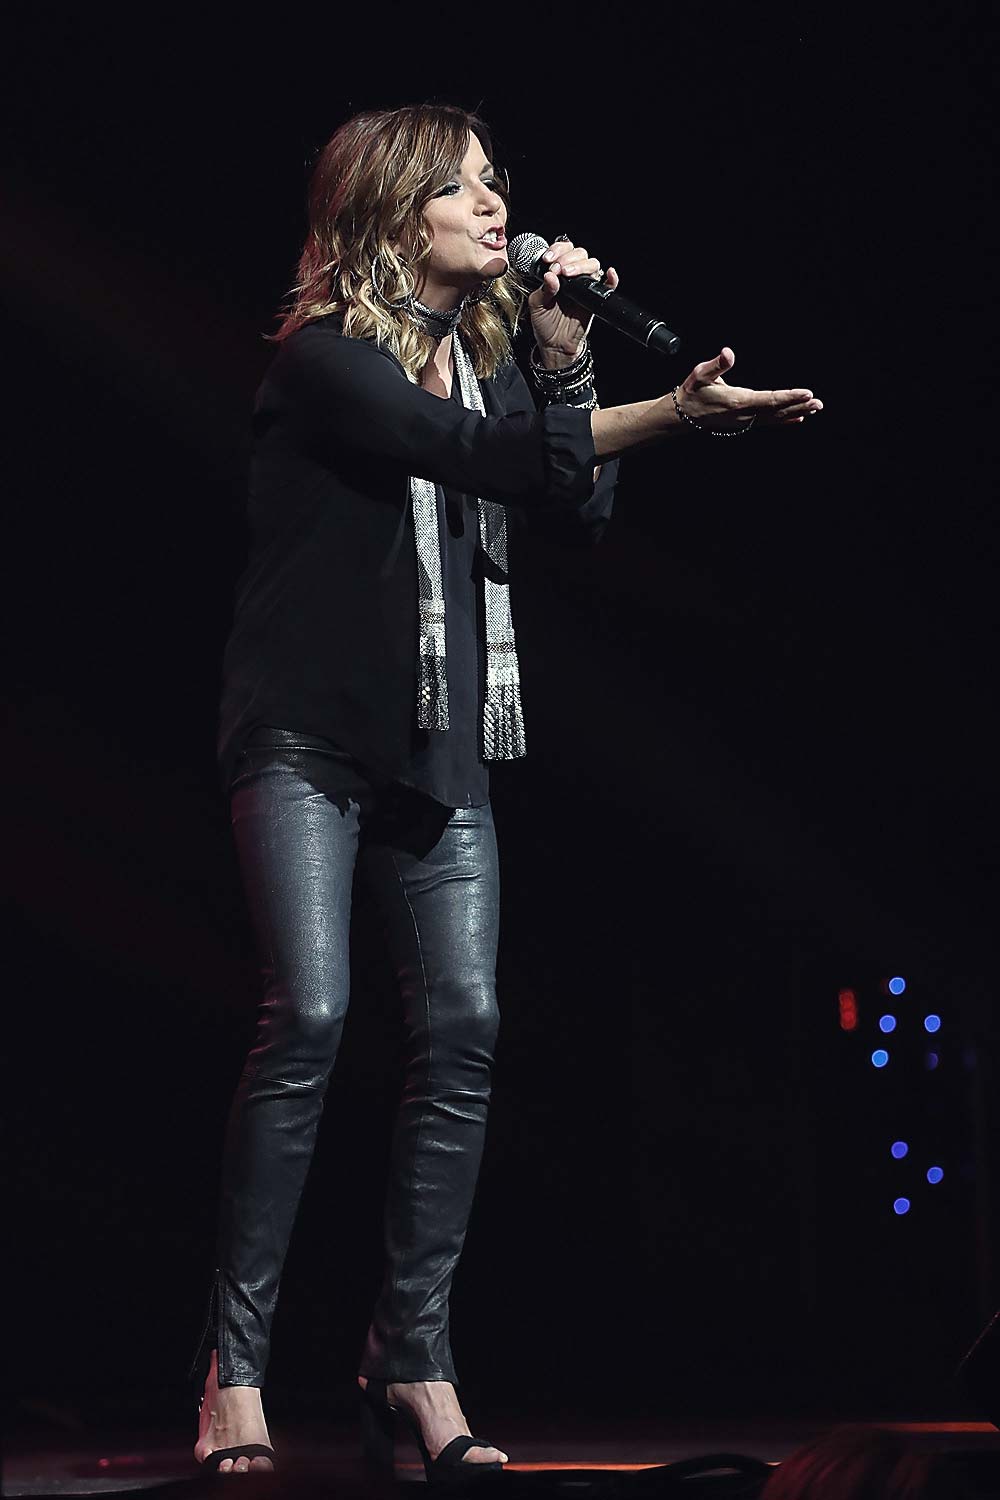 Martina McBride performs at Band Against Cancer